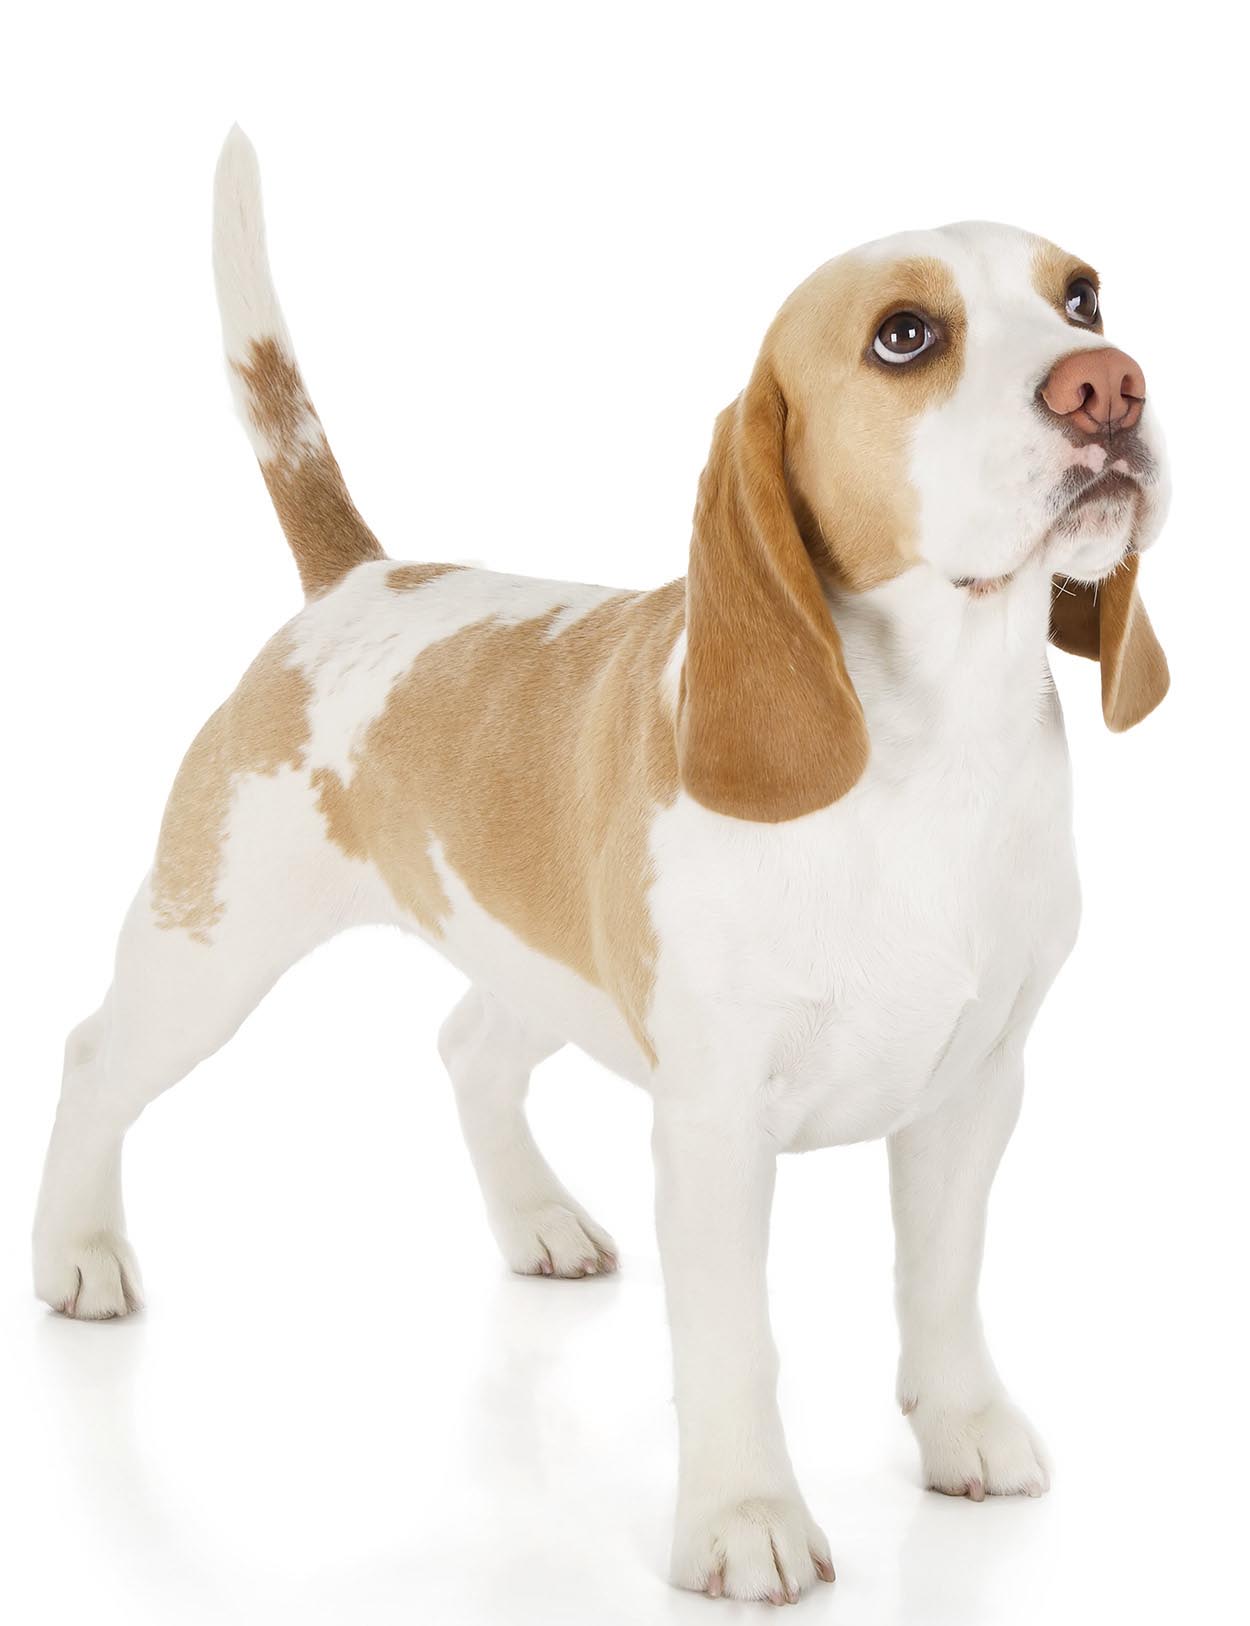 Beagle Determines Pregnancy with Poo